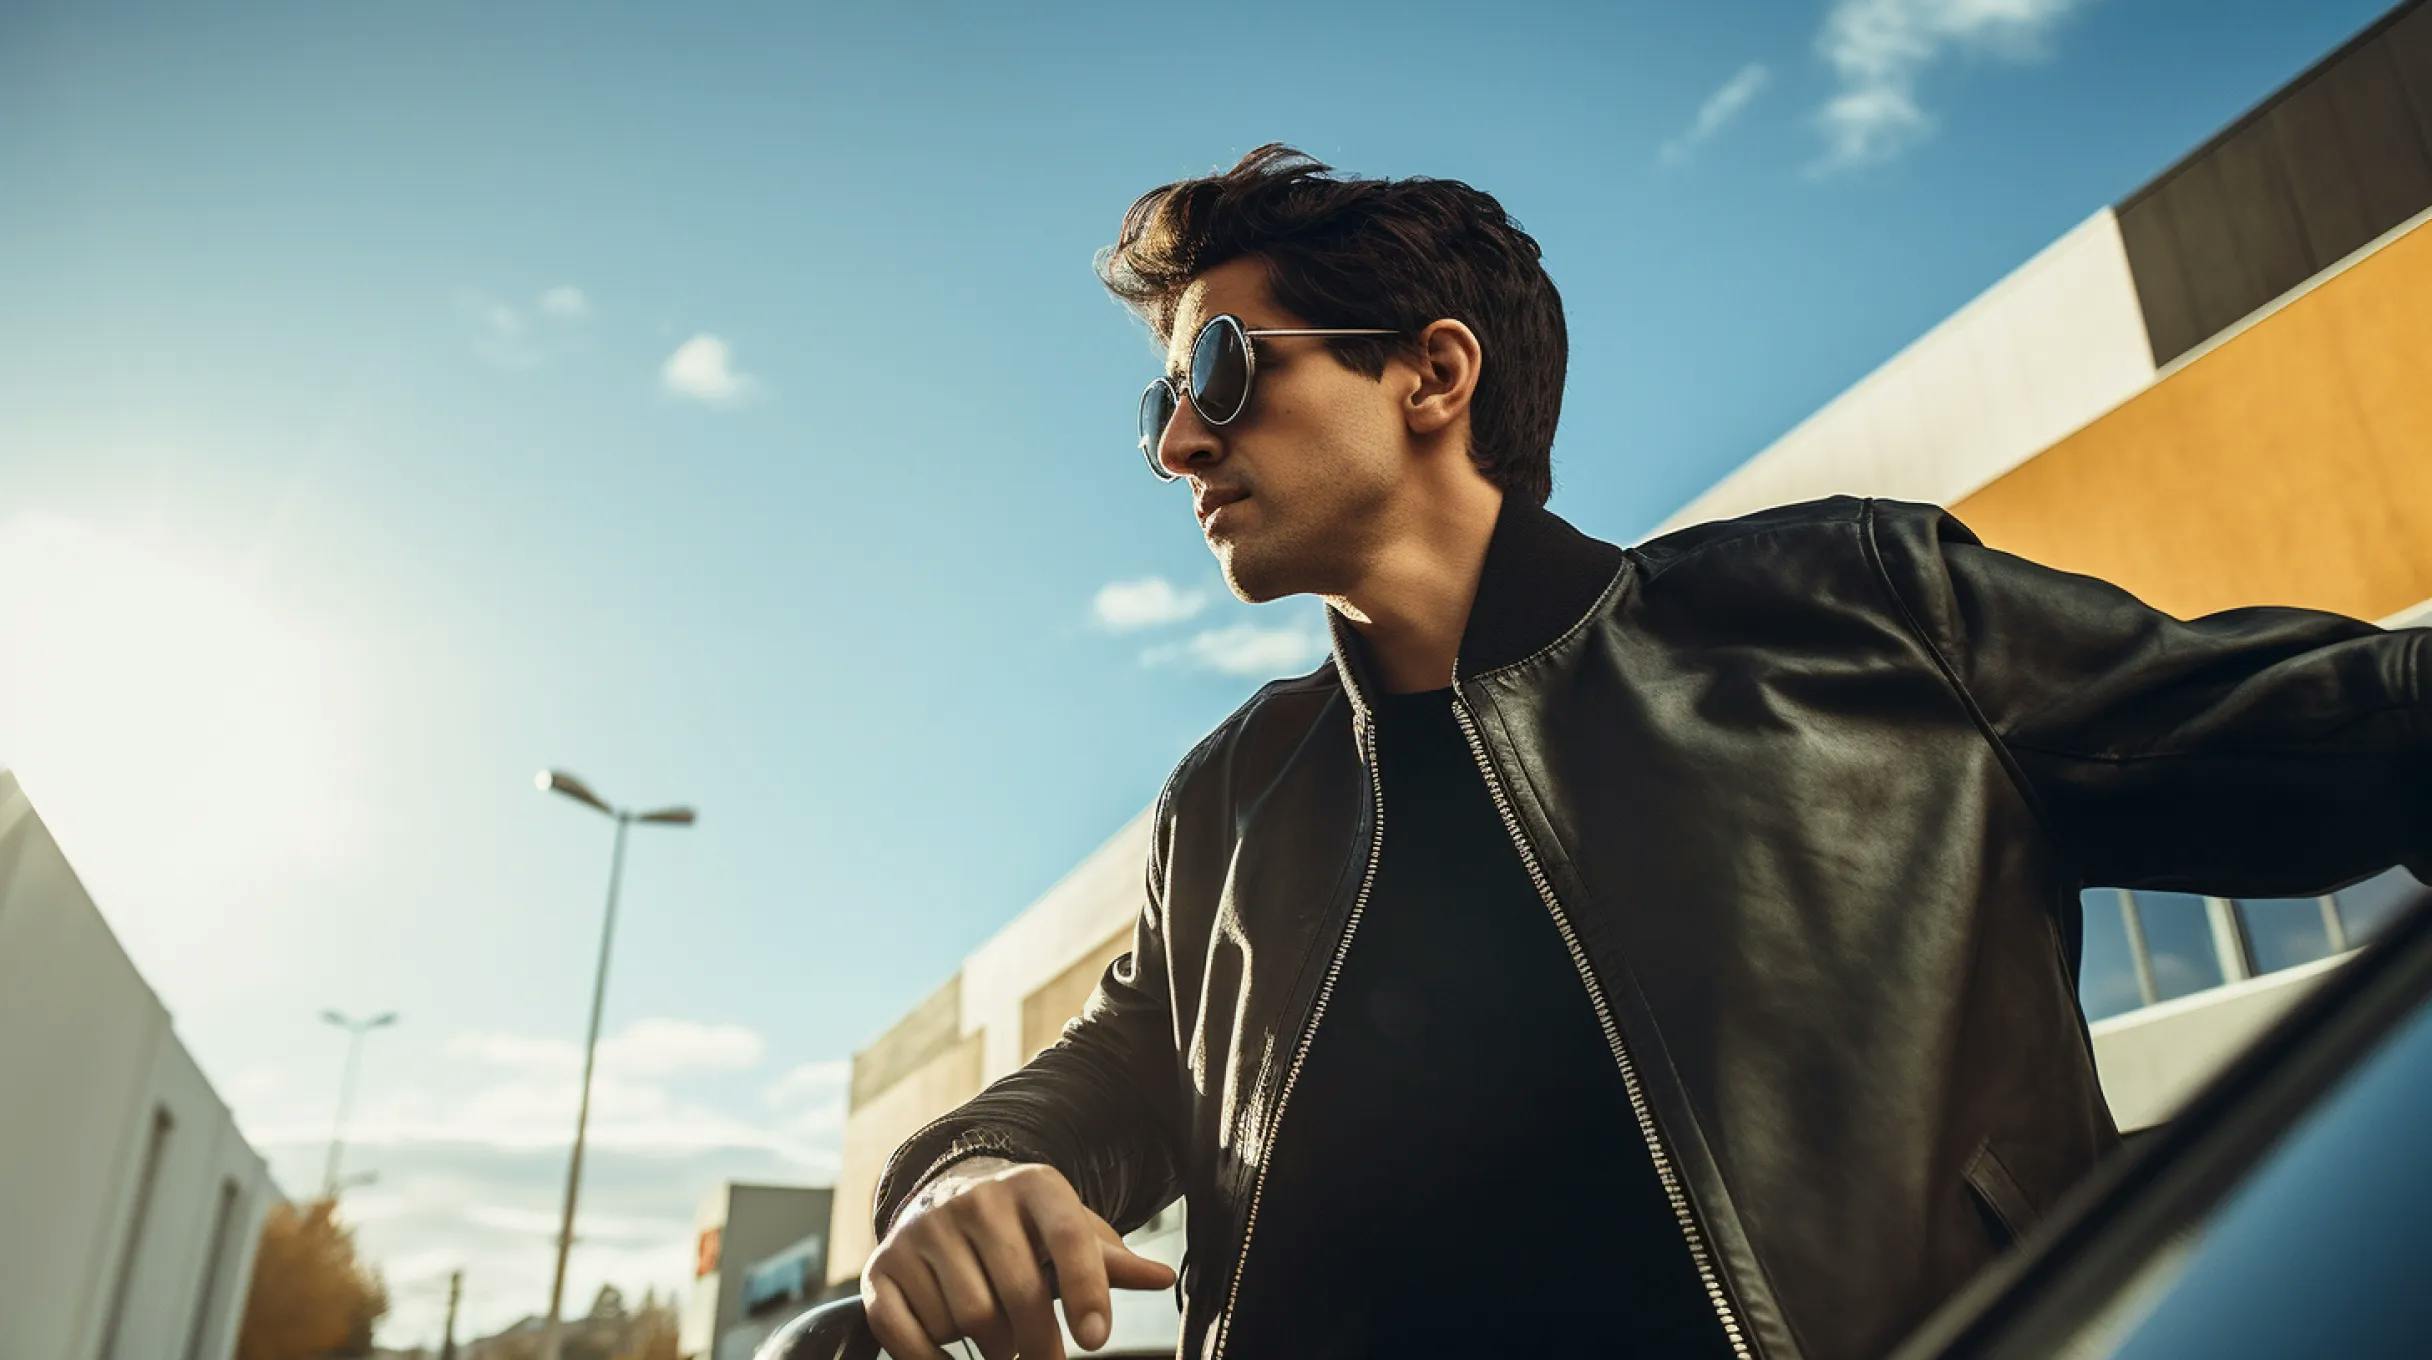 A man in sunglasses leaning on a car hood, exuding a cool and confident vibe.